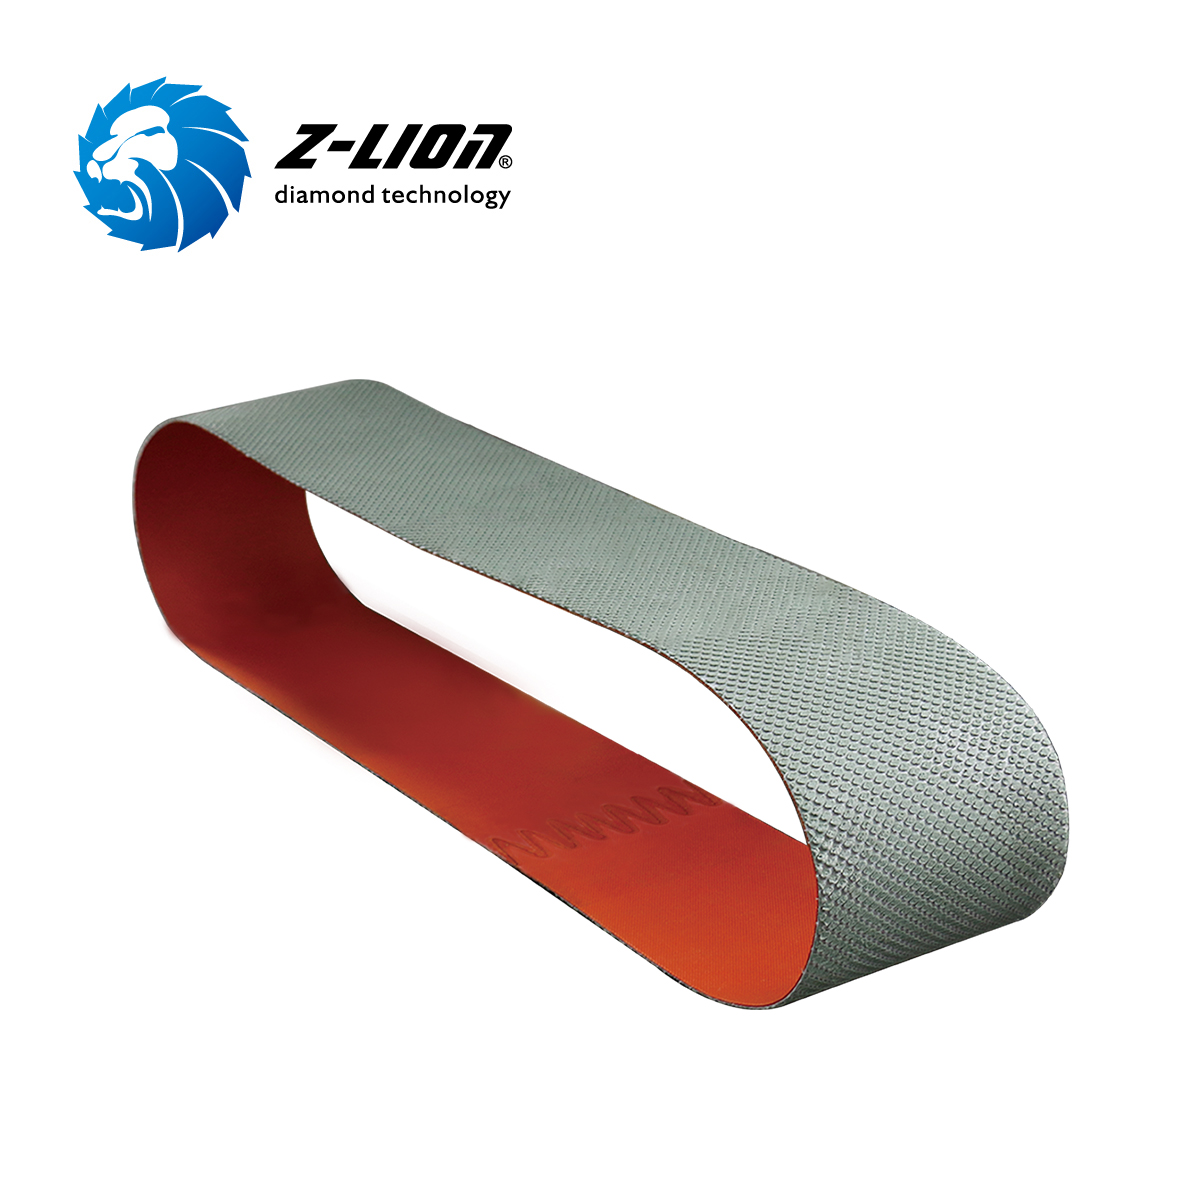 Z-LION Resin Diamond Polishing Belts for polishing cylinders with hard coatings such as dryer cylinder for paper mill Featured Image